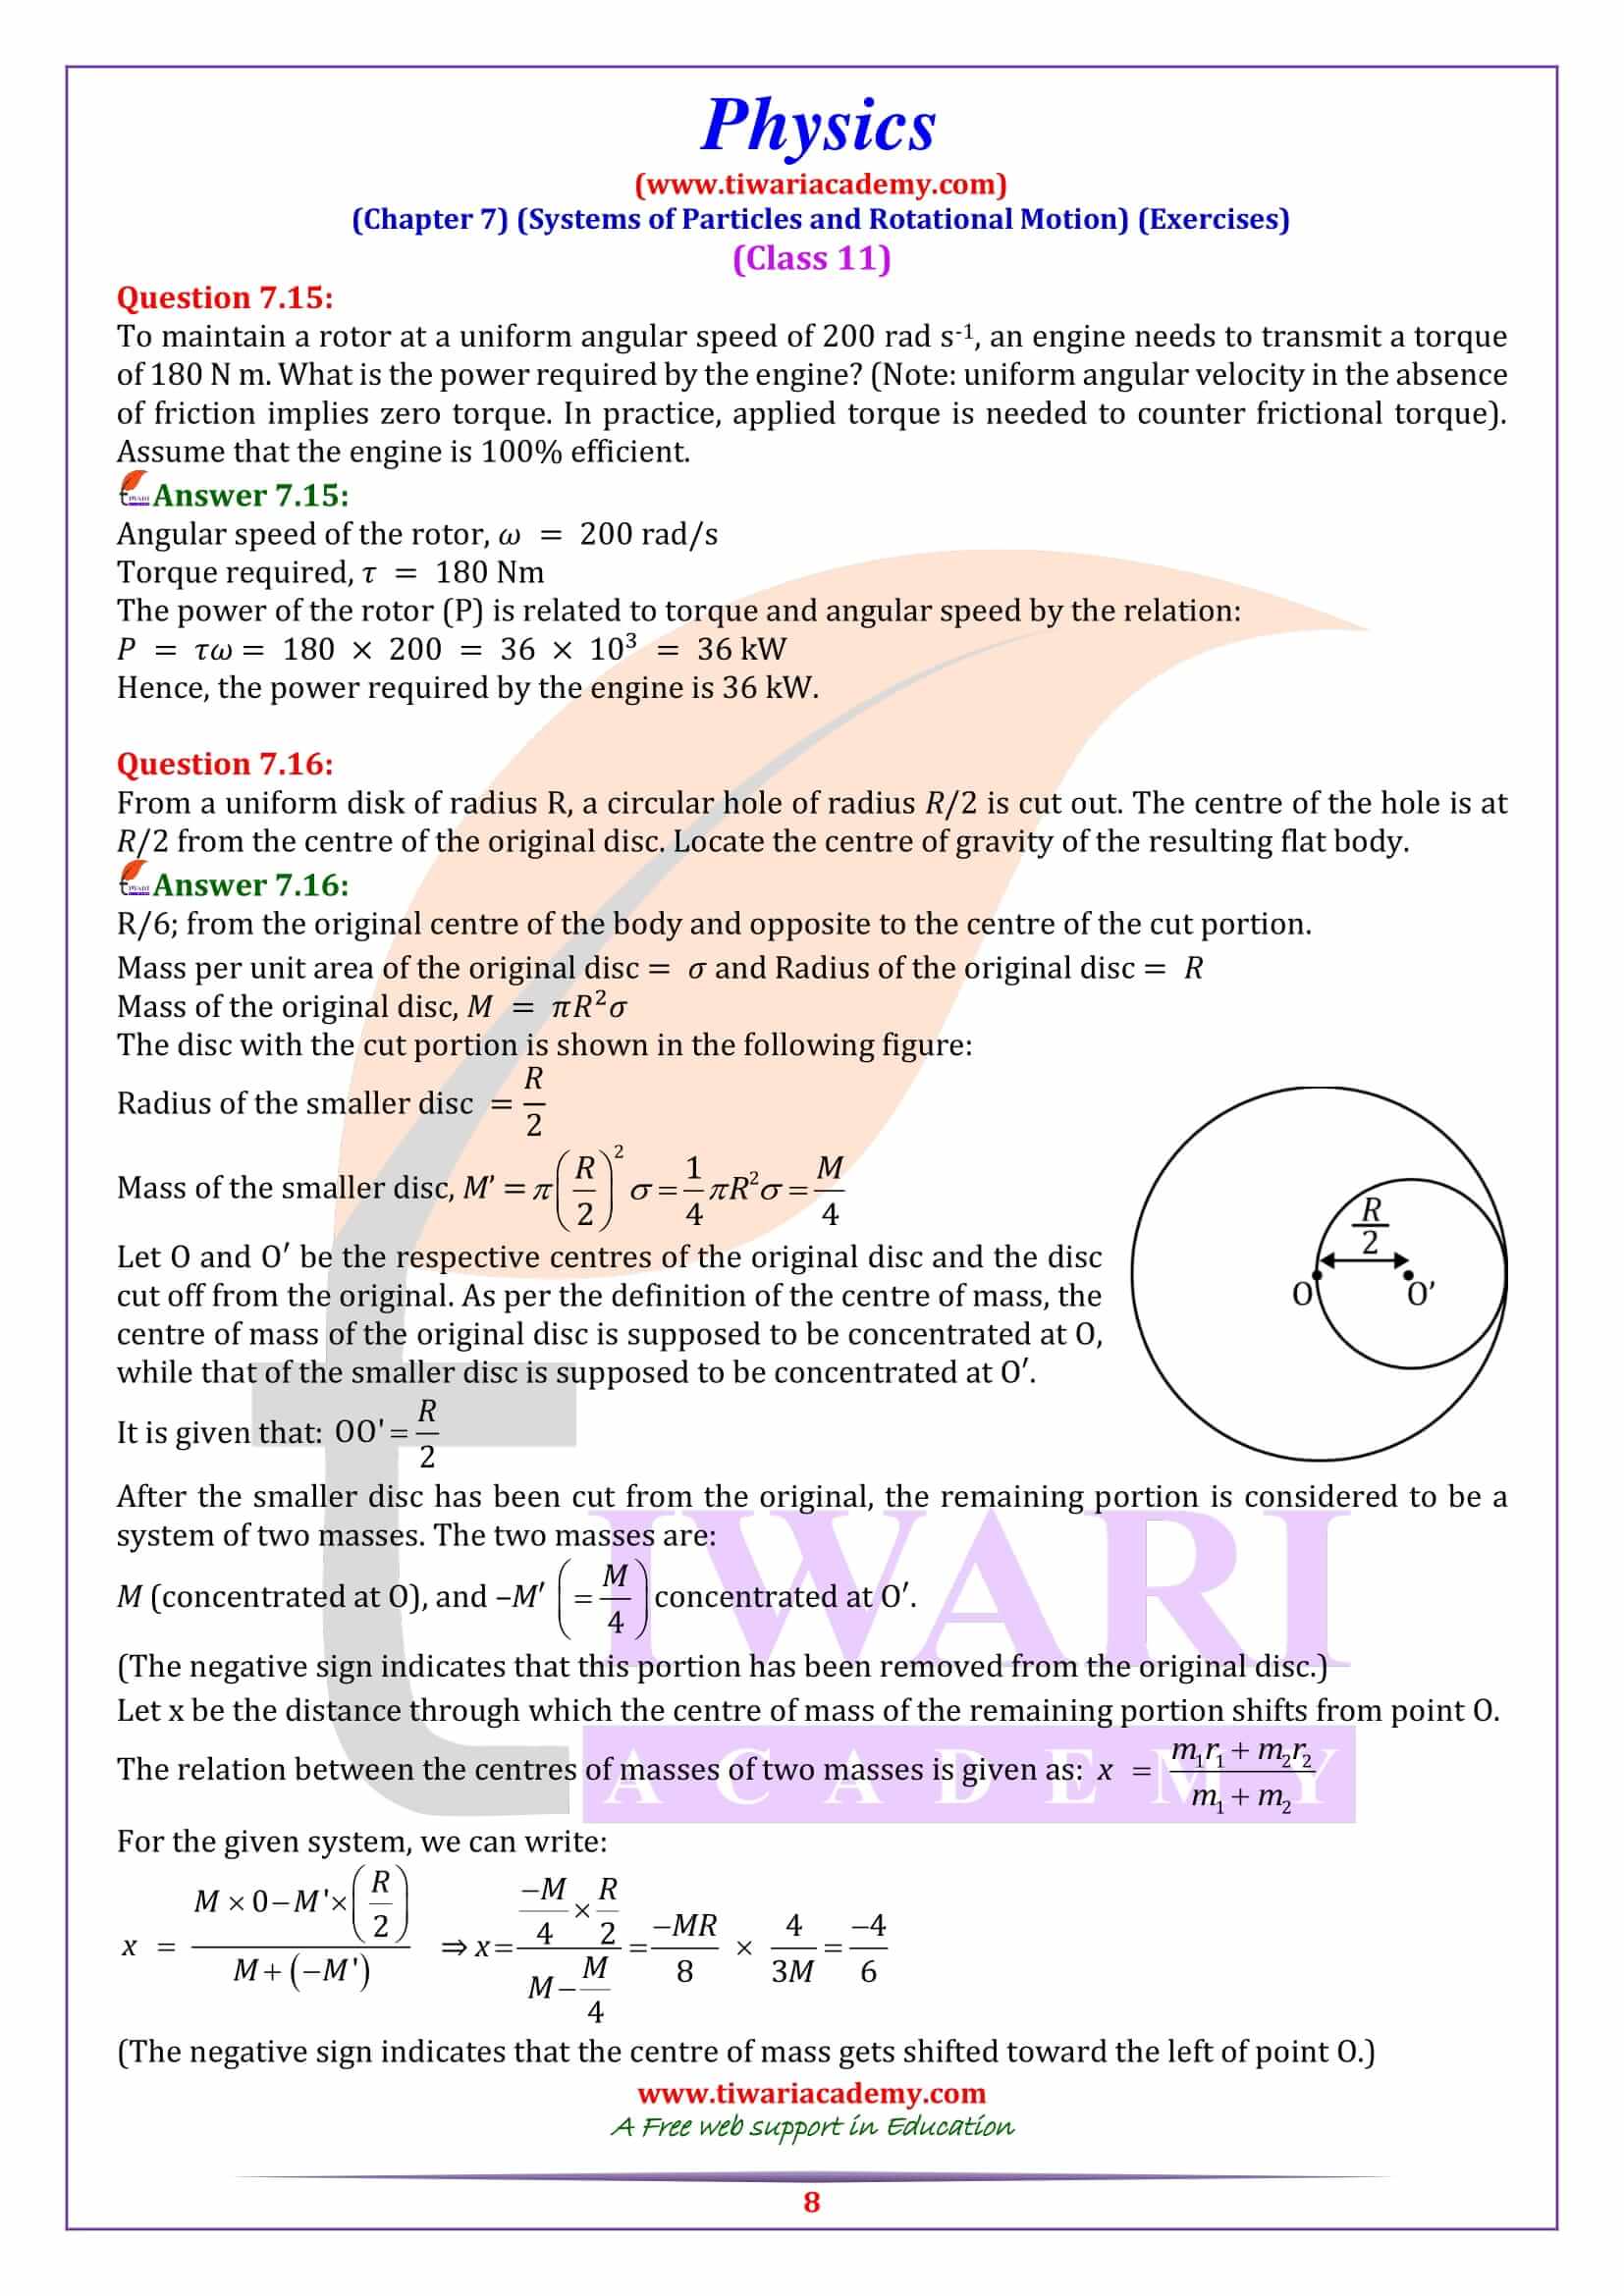 Class 11 Physics Chapter 7 Exercise updated for new session